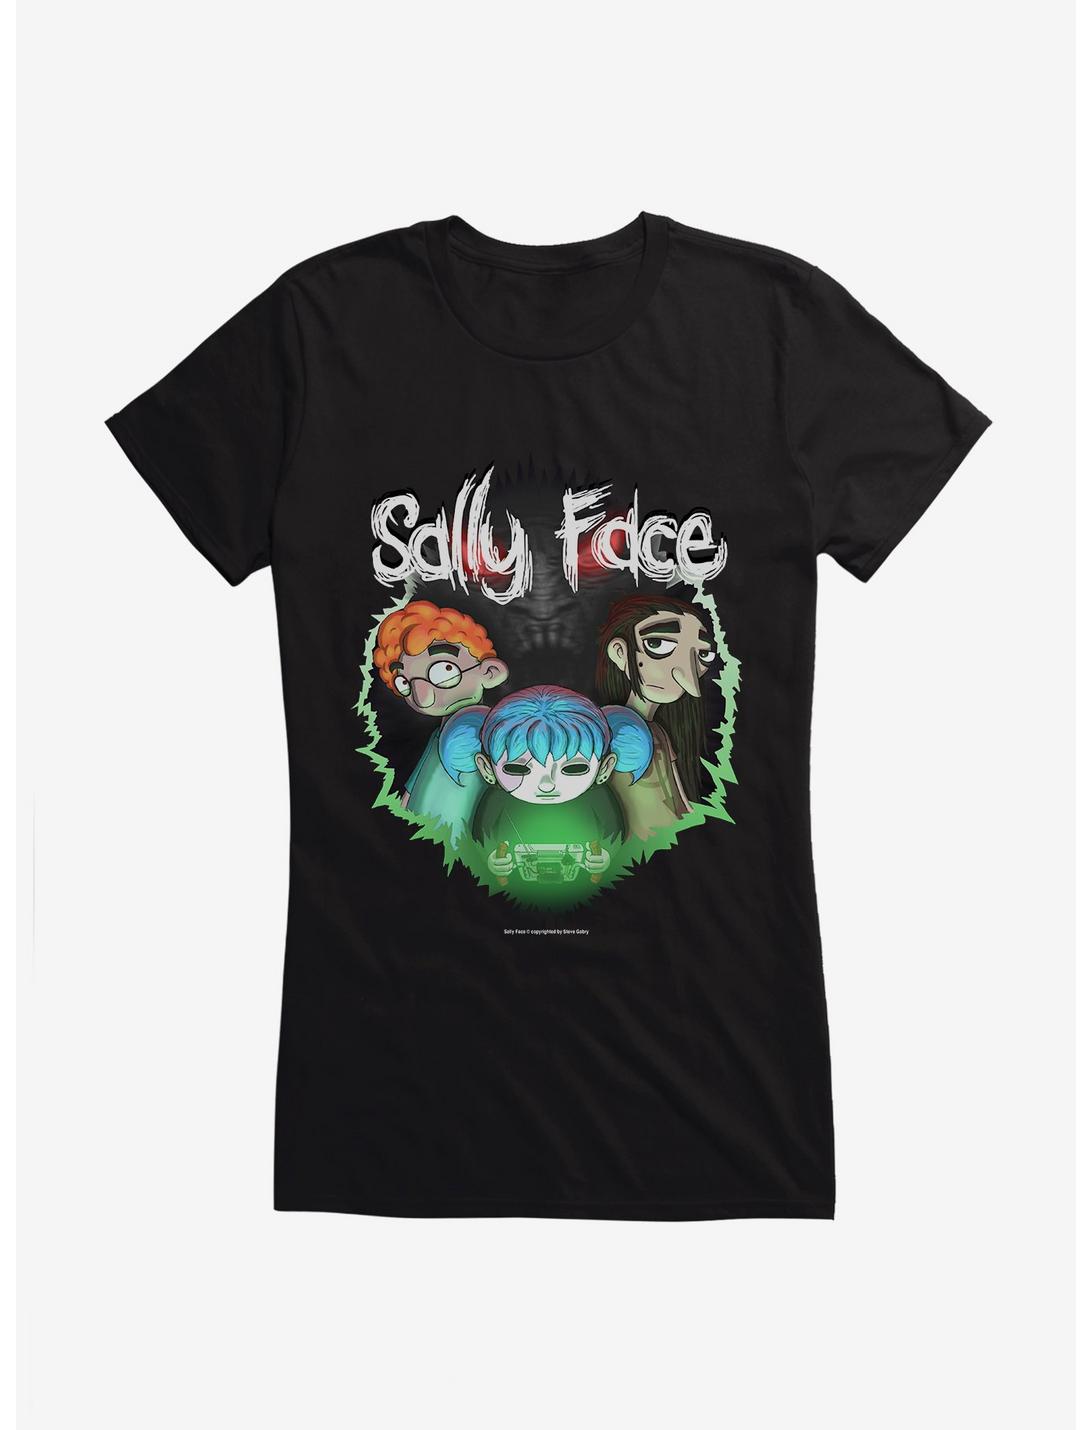 Sally Face Episode Two: The Wretched Girls T-Shirt, , hi-res